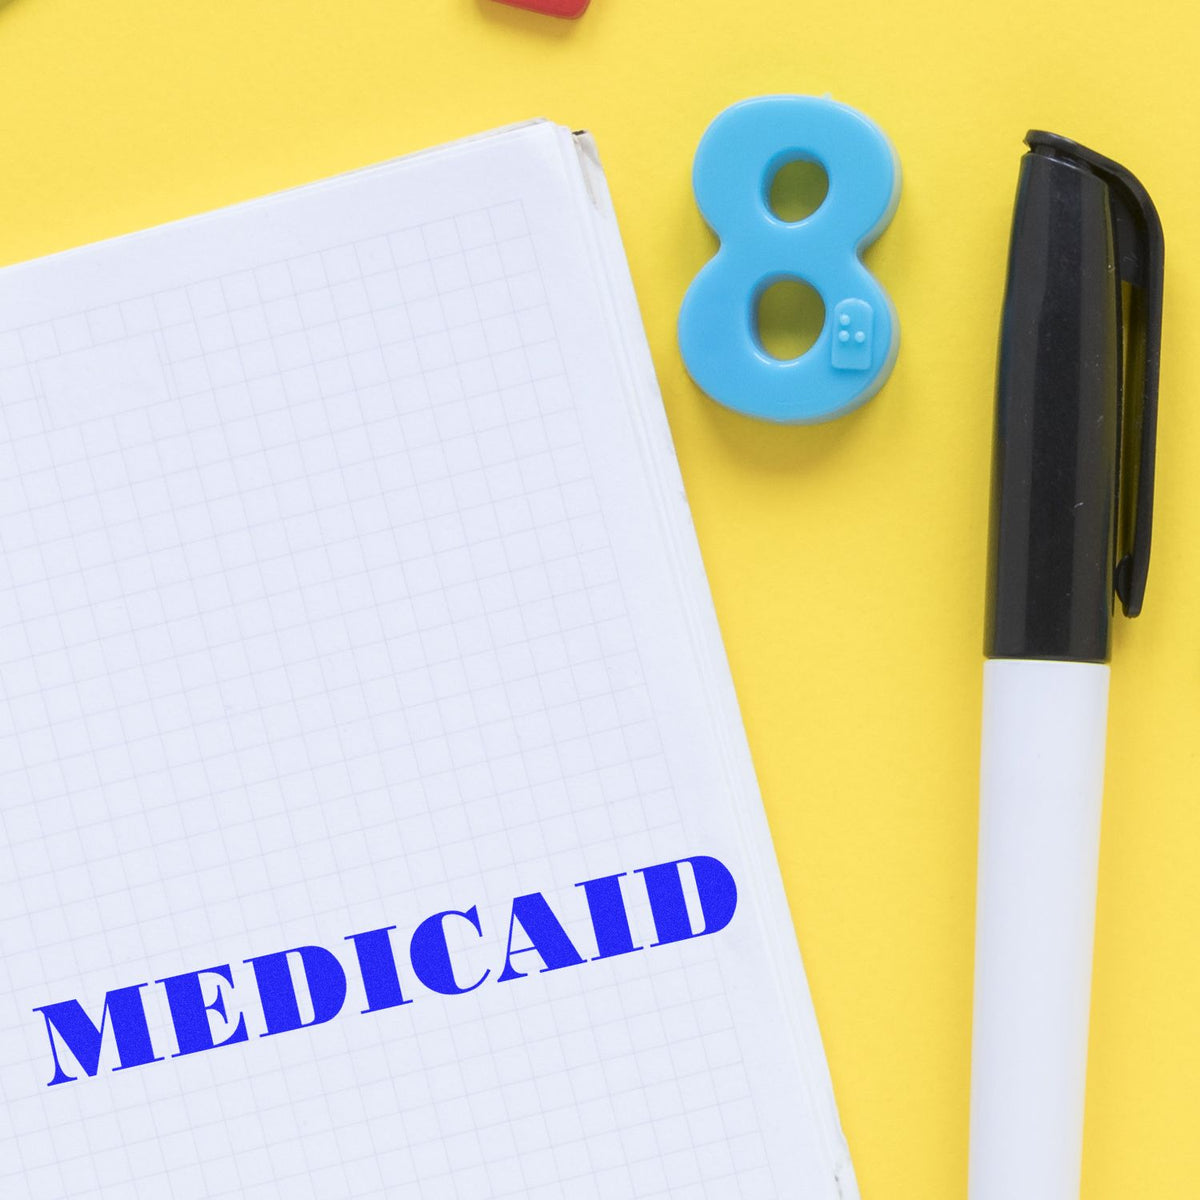 Medicaid Rubber Stamp In Use Photo